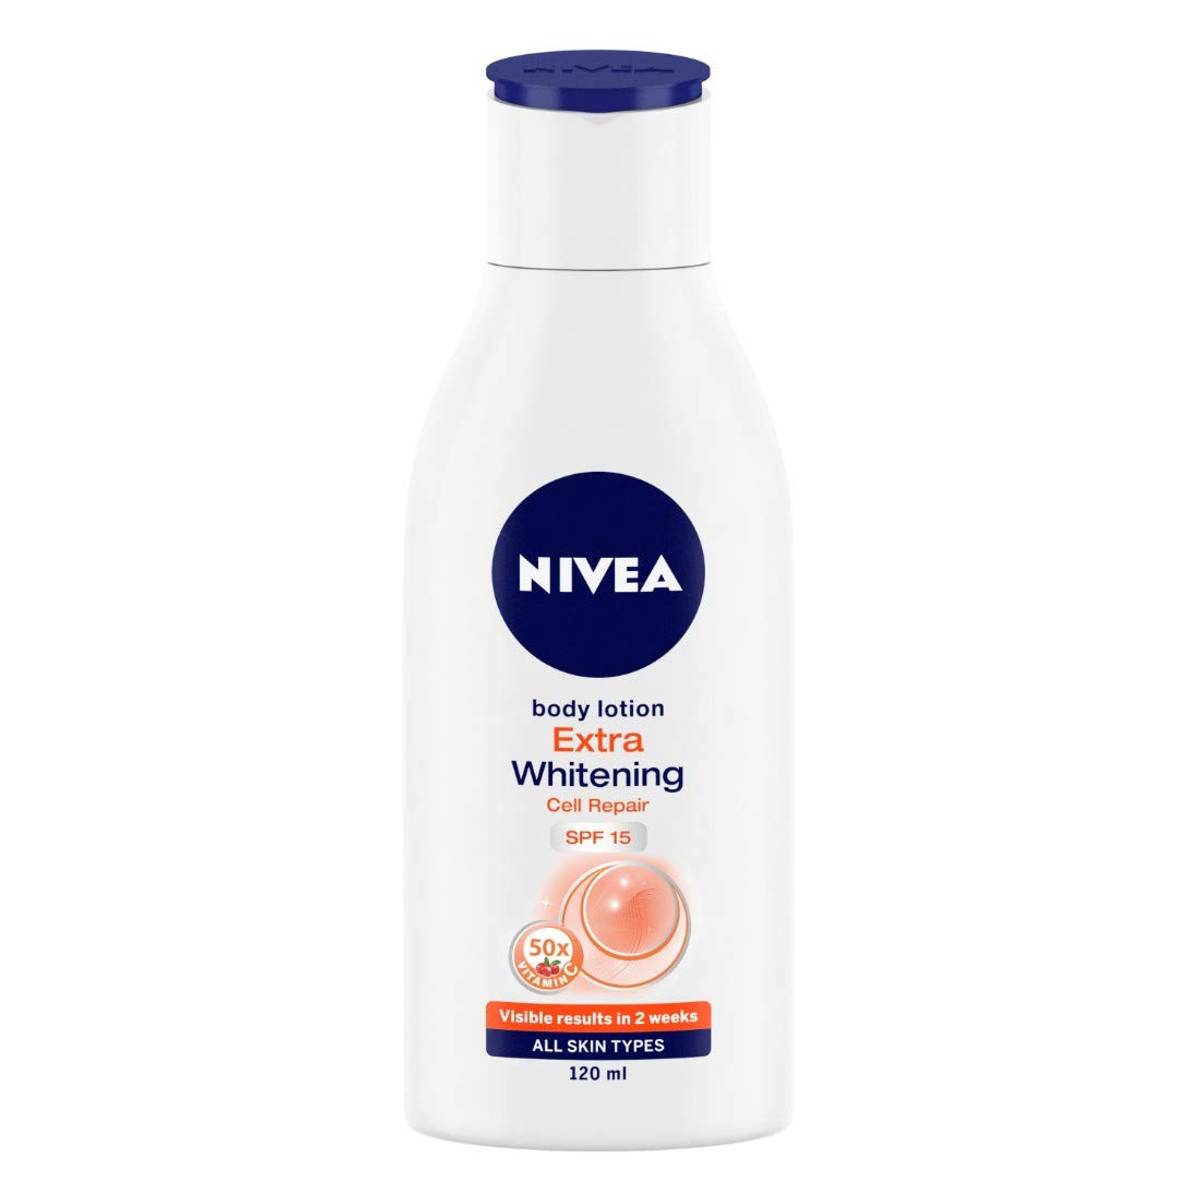 Nivea Body Lotion Extra Whitening Cell Repair 40Rs Off 75ml